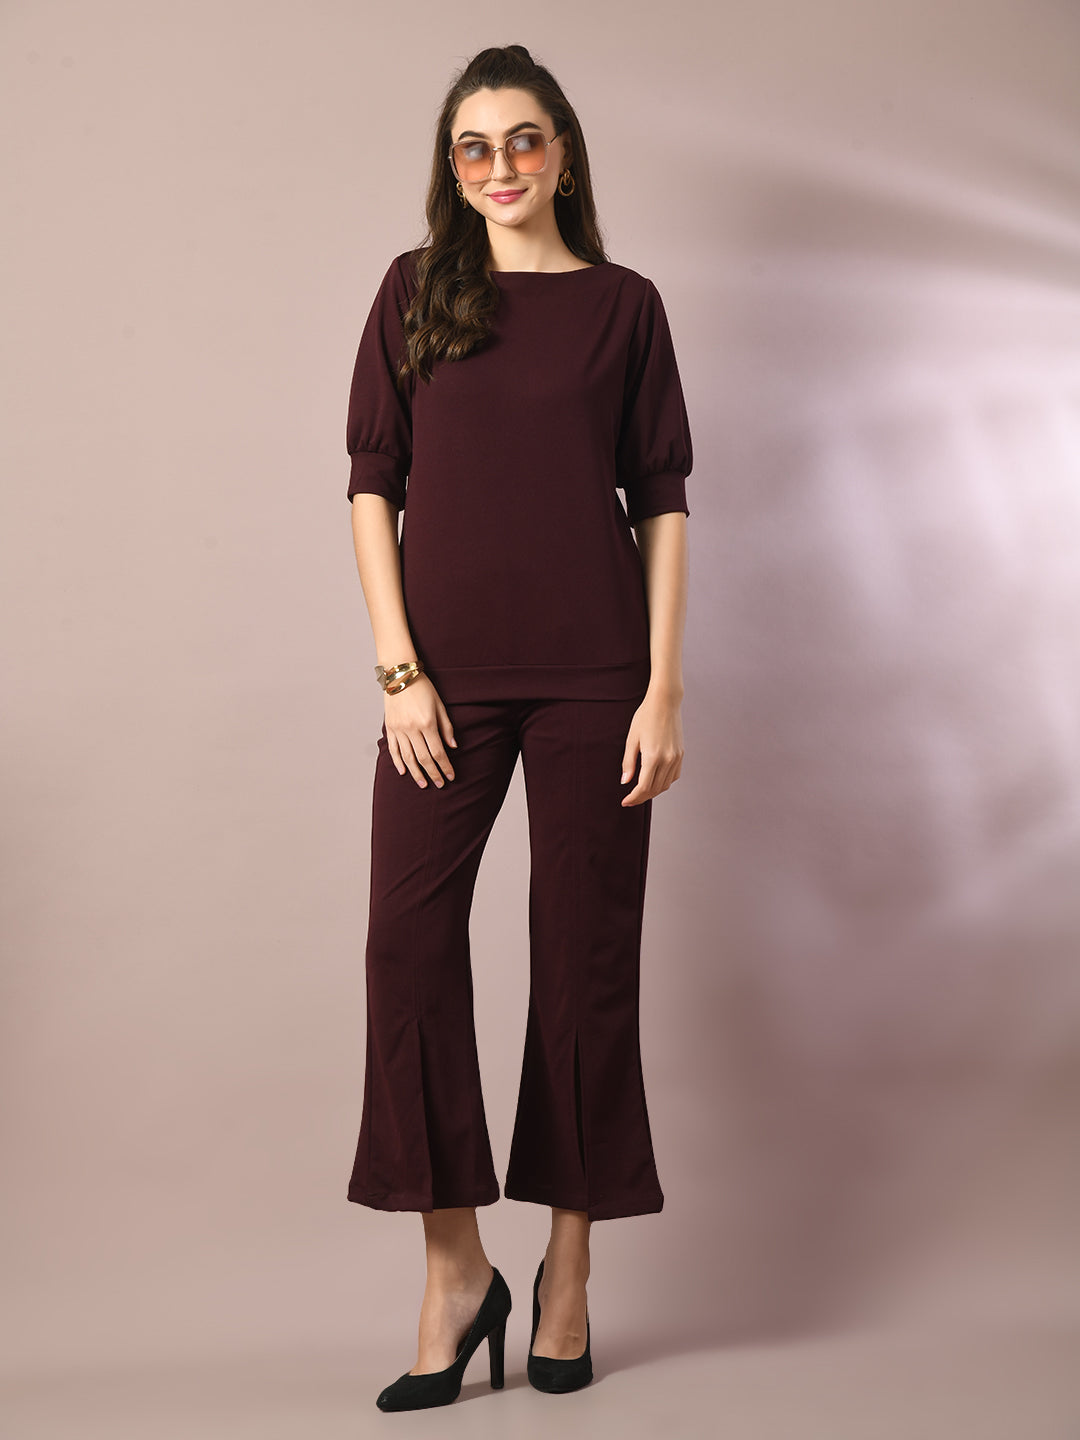 Women's  Coffee Brown Solid Boat Neck Party Top With Trousers Co-Ord Set  - Myshka